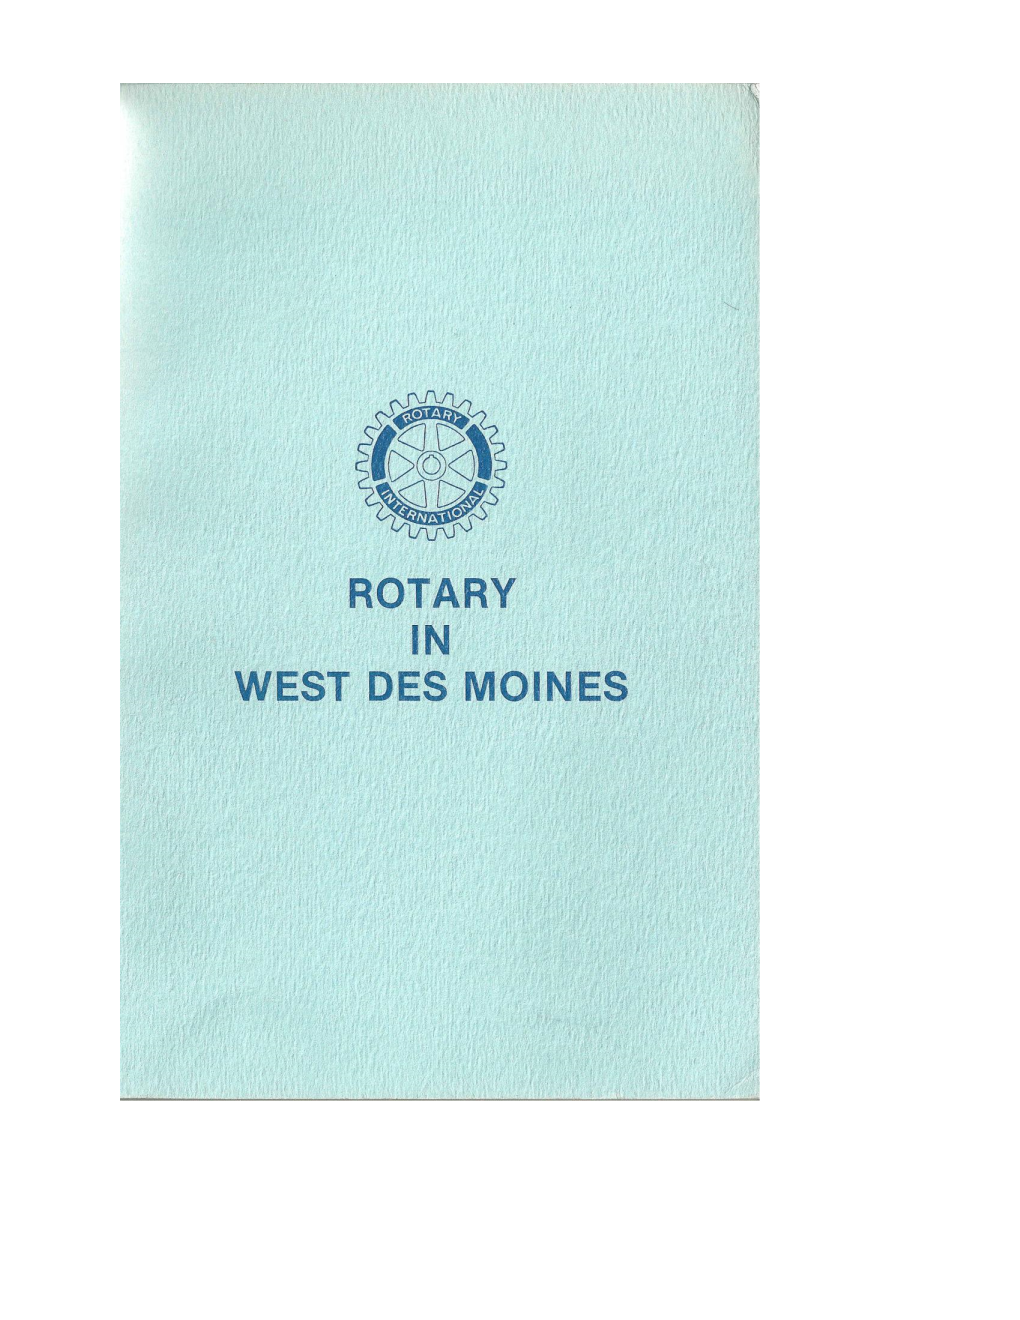 History of the Rotary Club of West Des Moines